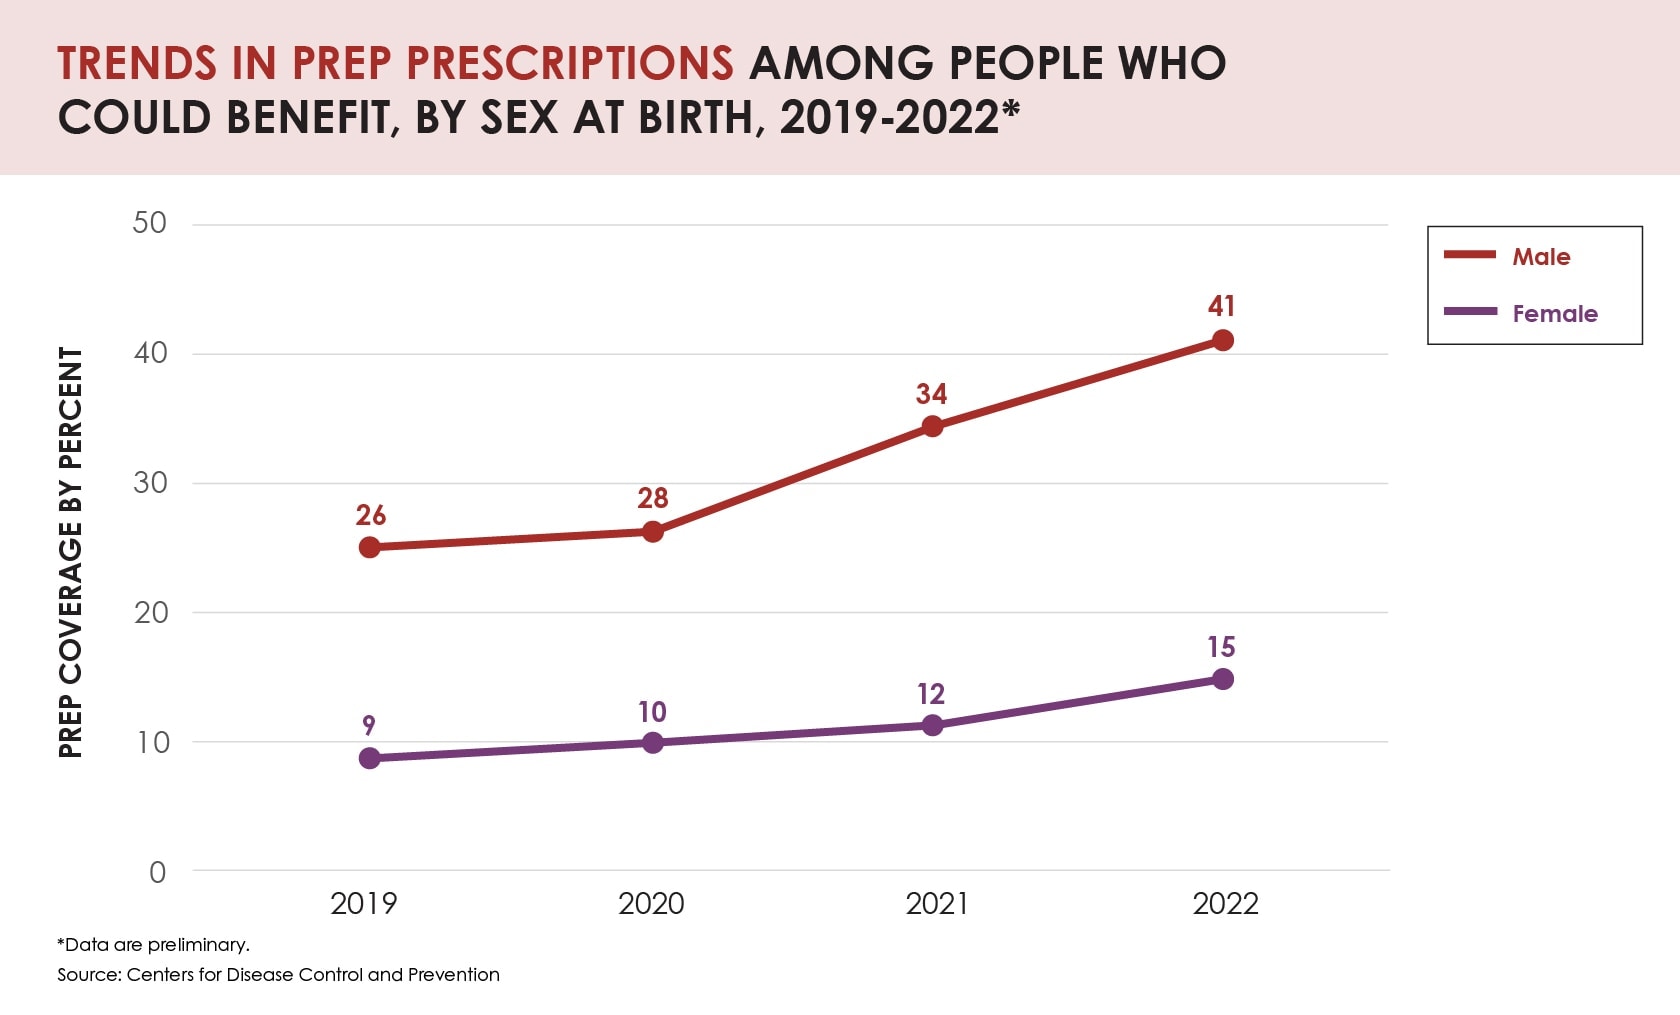 Chart shows that more than 40 percent males who could benefit from PrEP were prescribed it compared to 15 percent females.